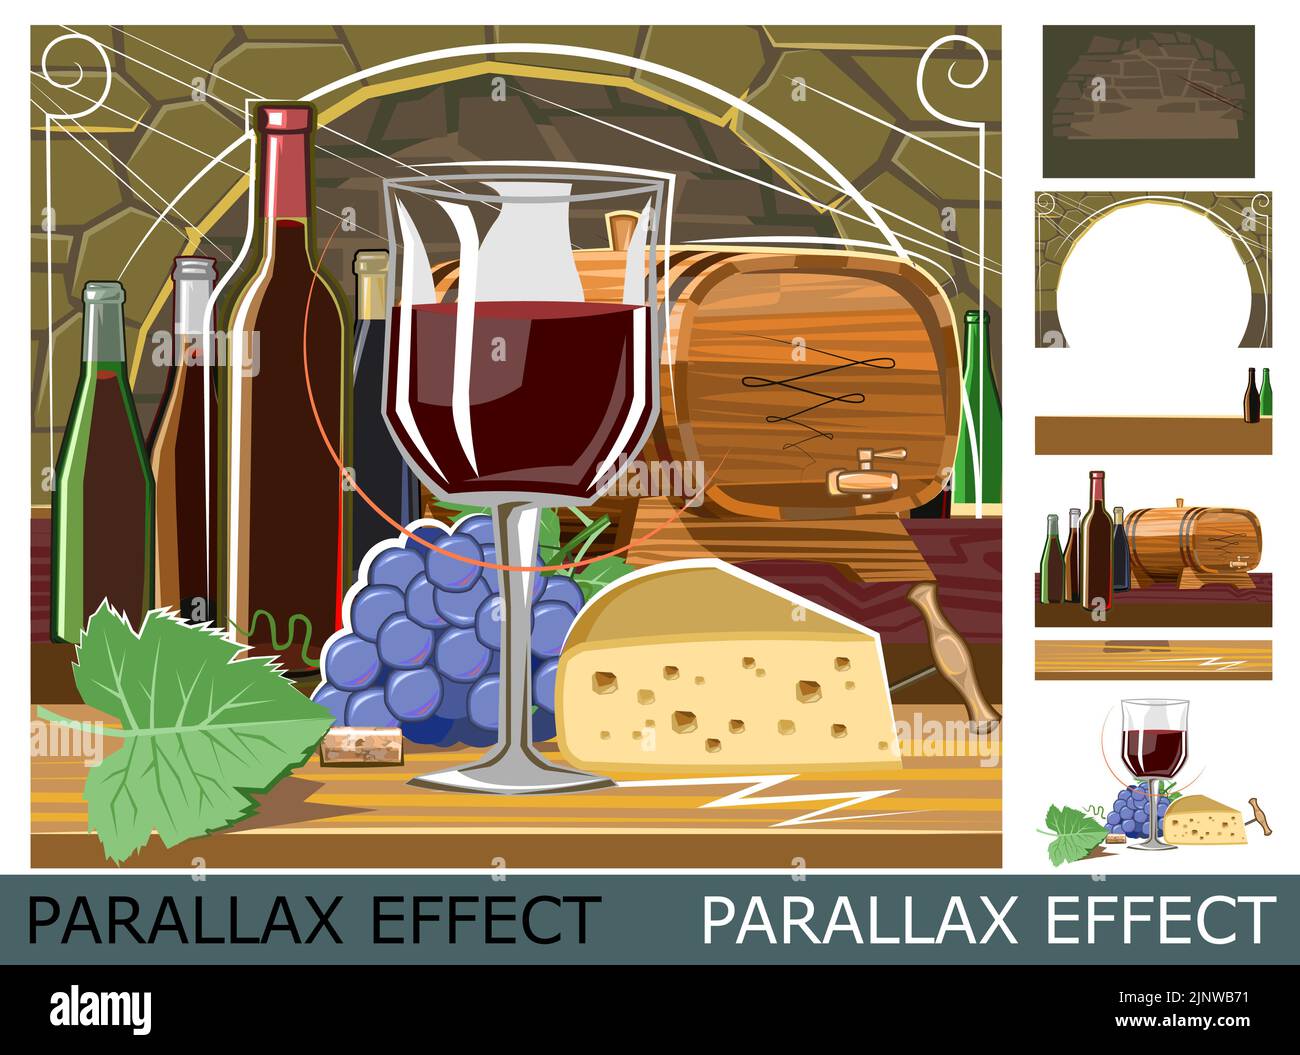 Wine tasting in wine cellar. Emblem. Image from layers for overlay with parallax effect. Red grape wine, bottles, glass and wooden barrel. Symbolic Stock Vector